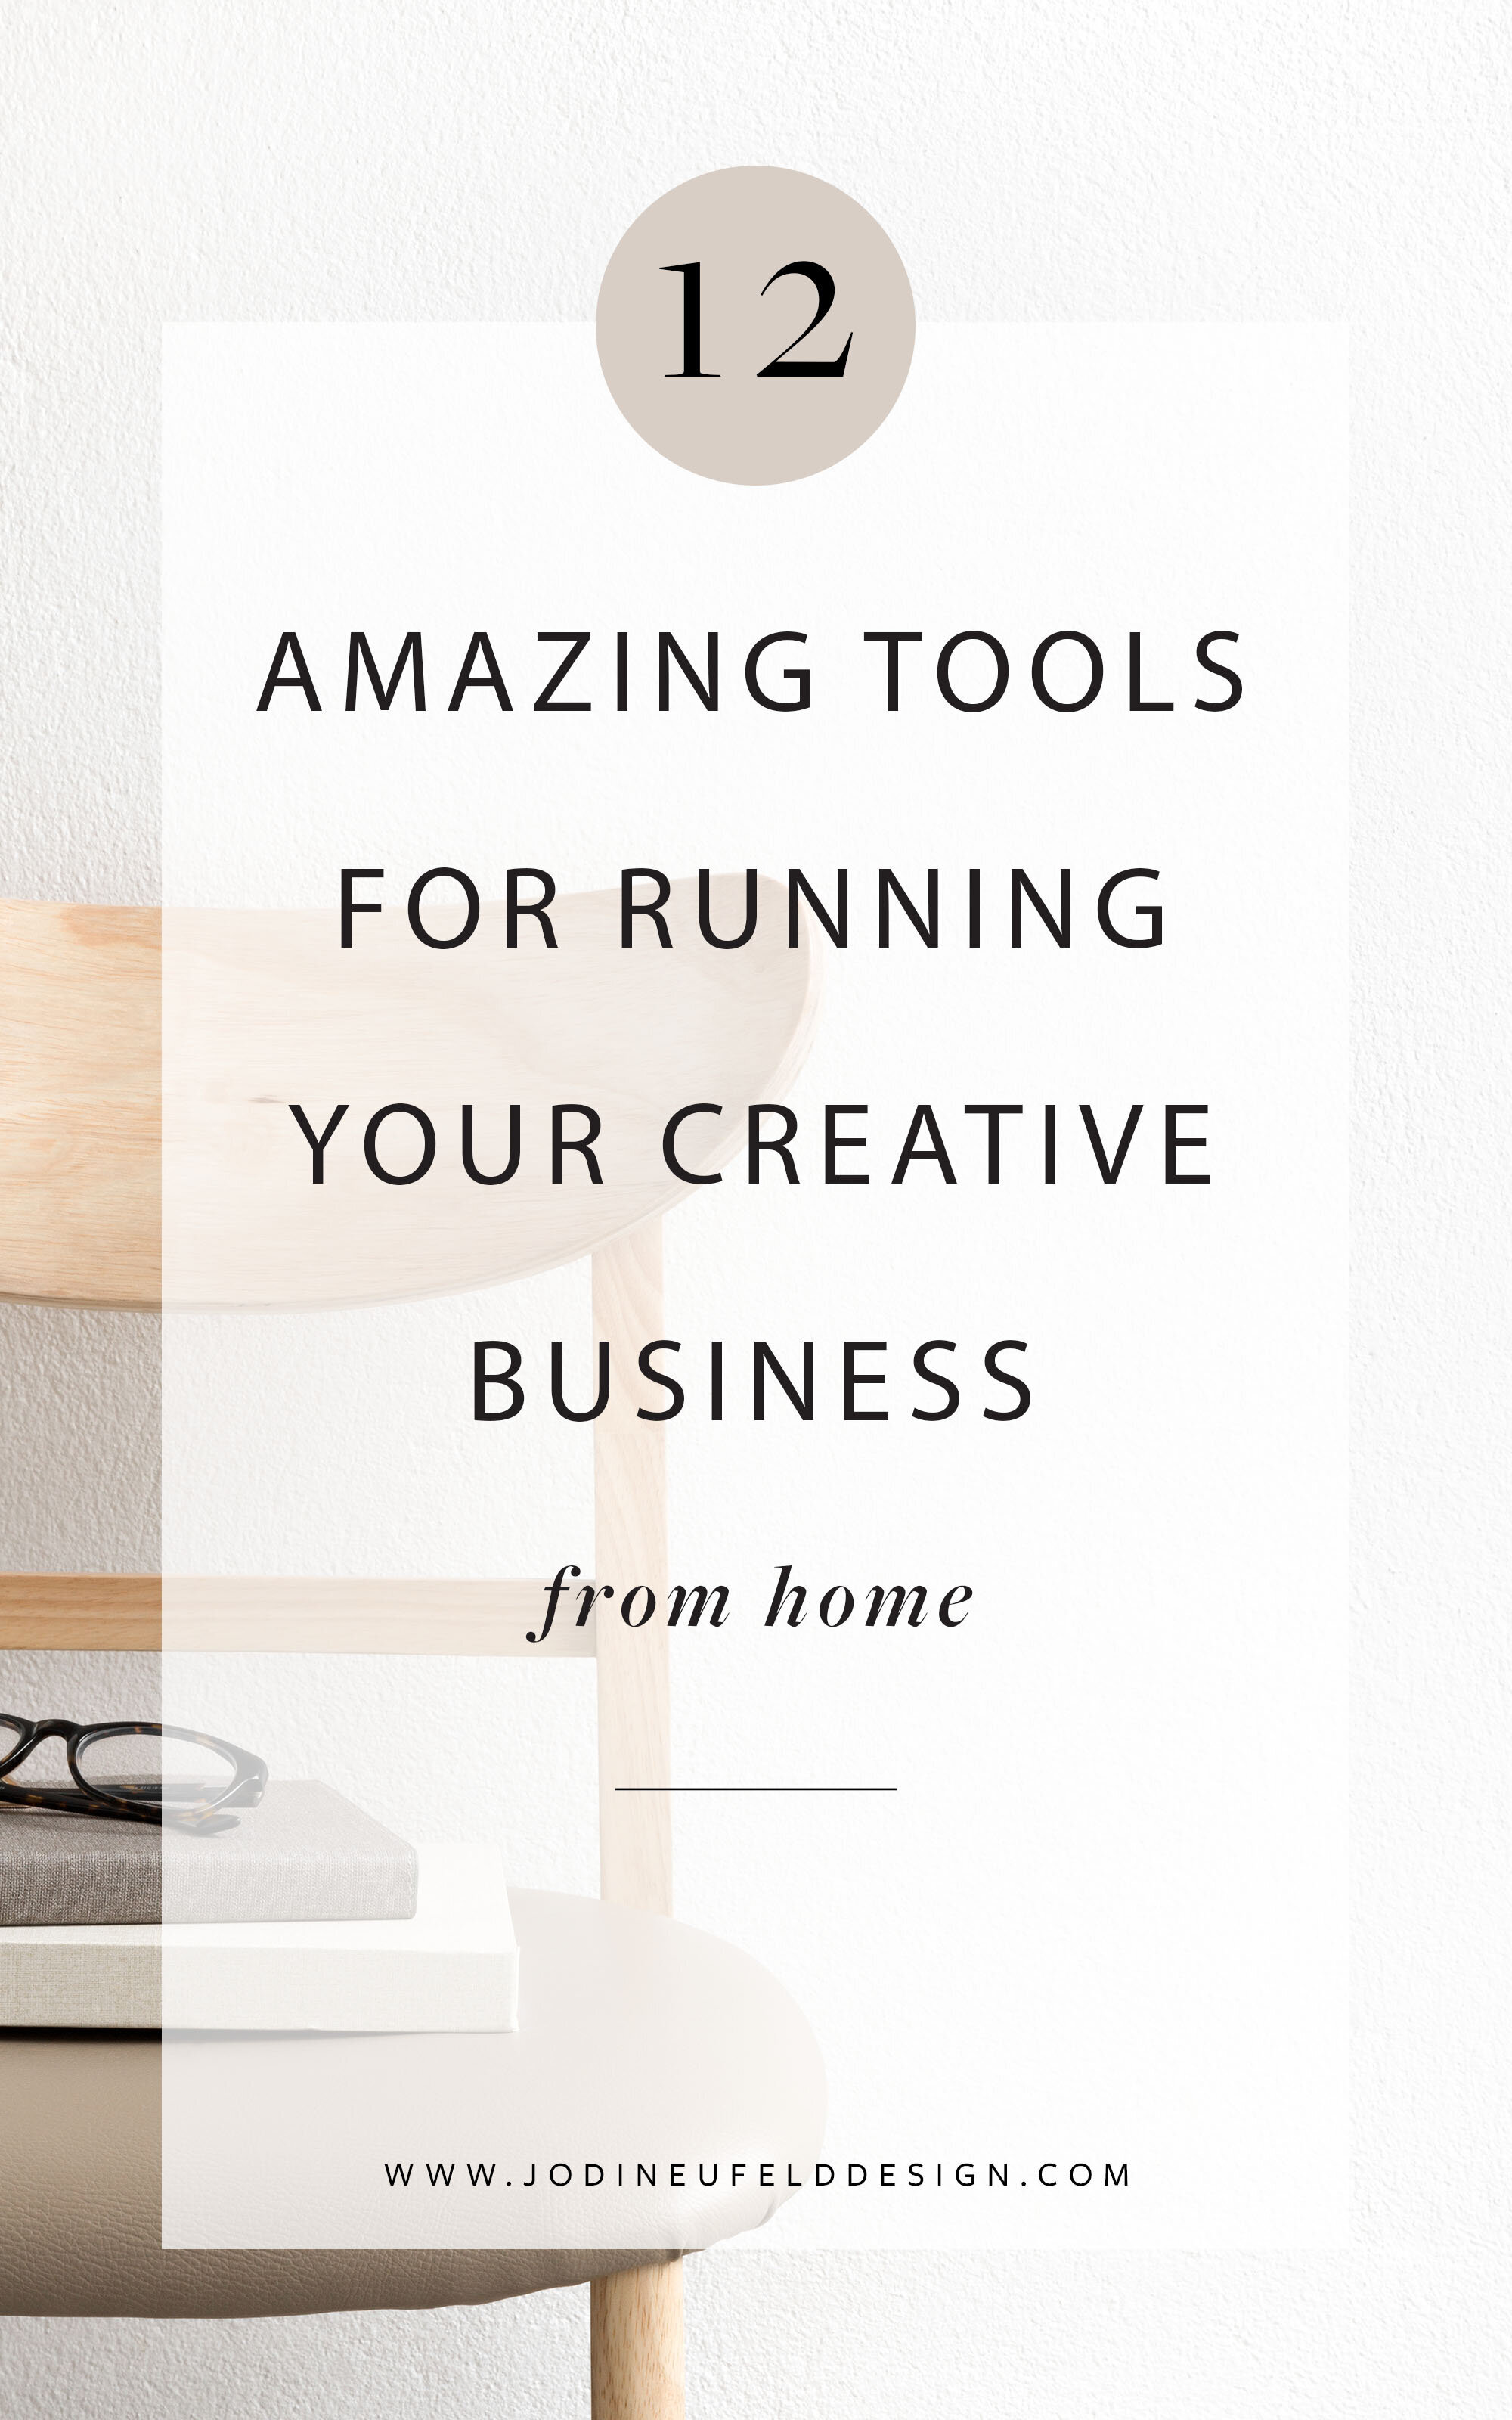 12 amazing tools for running your creative business from home by Jodi Neufeld Design